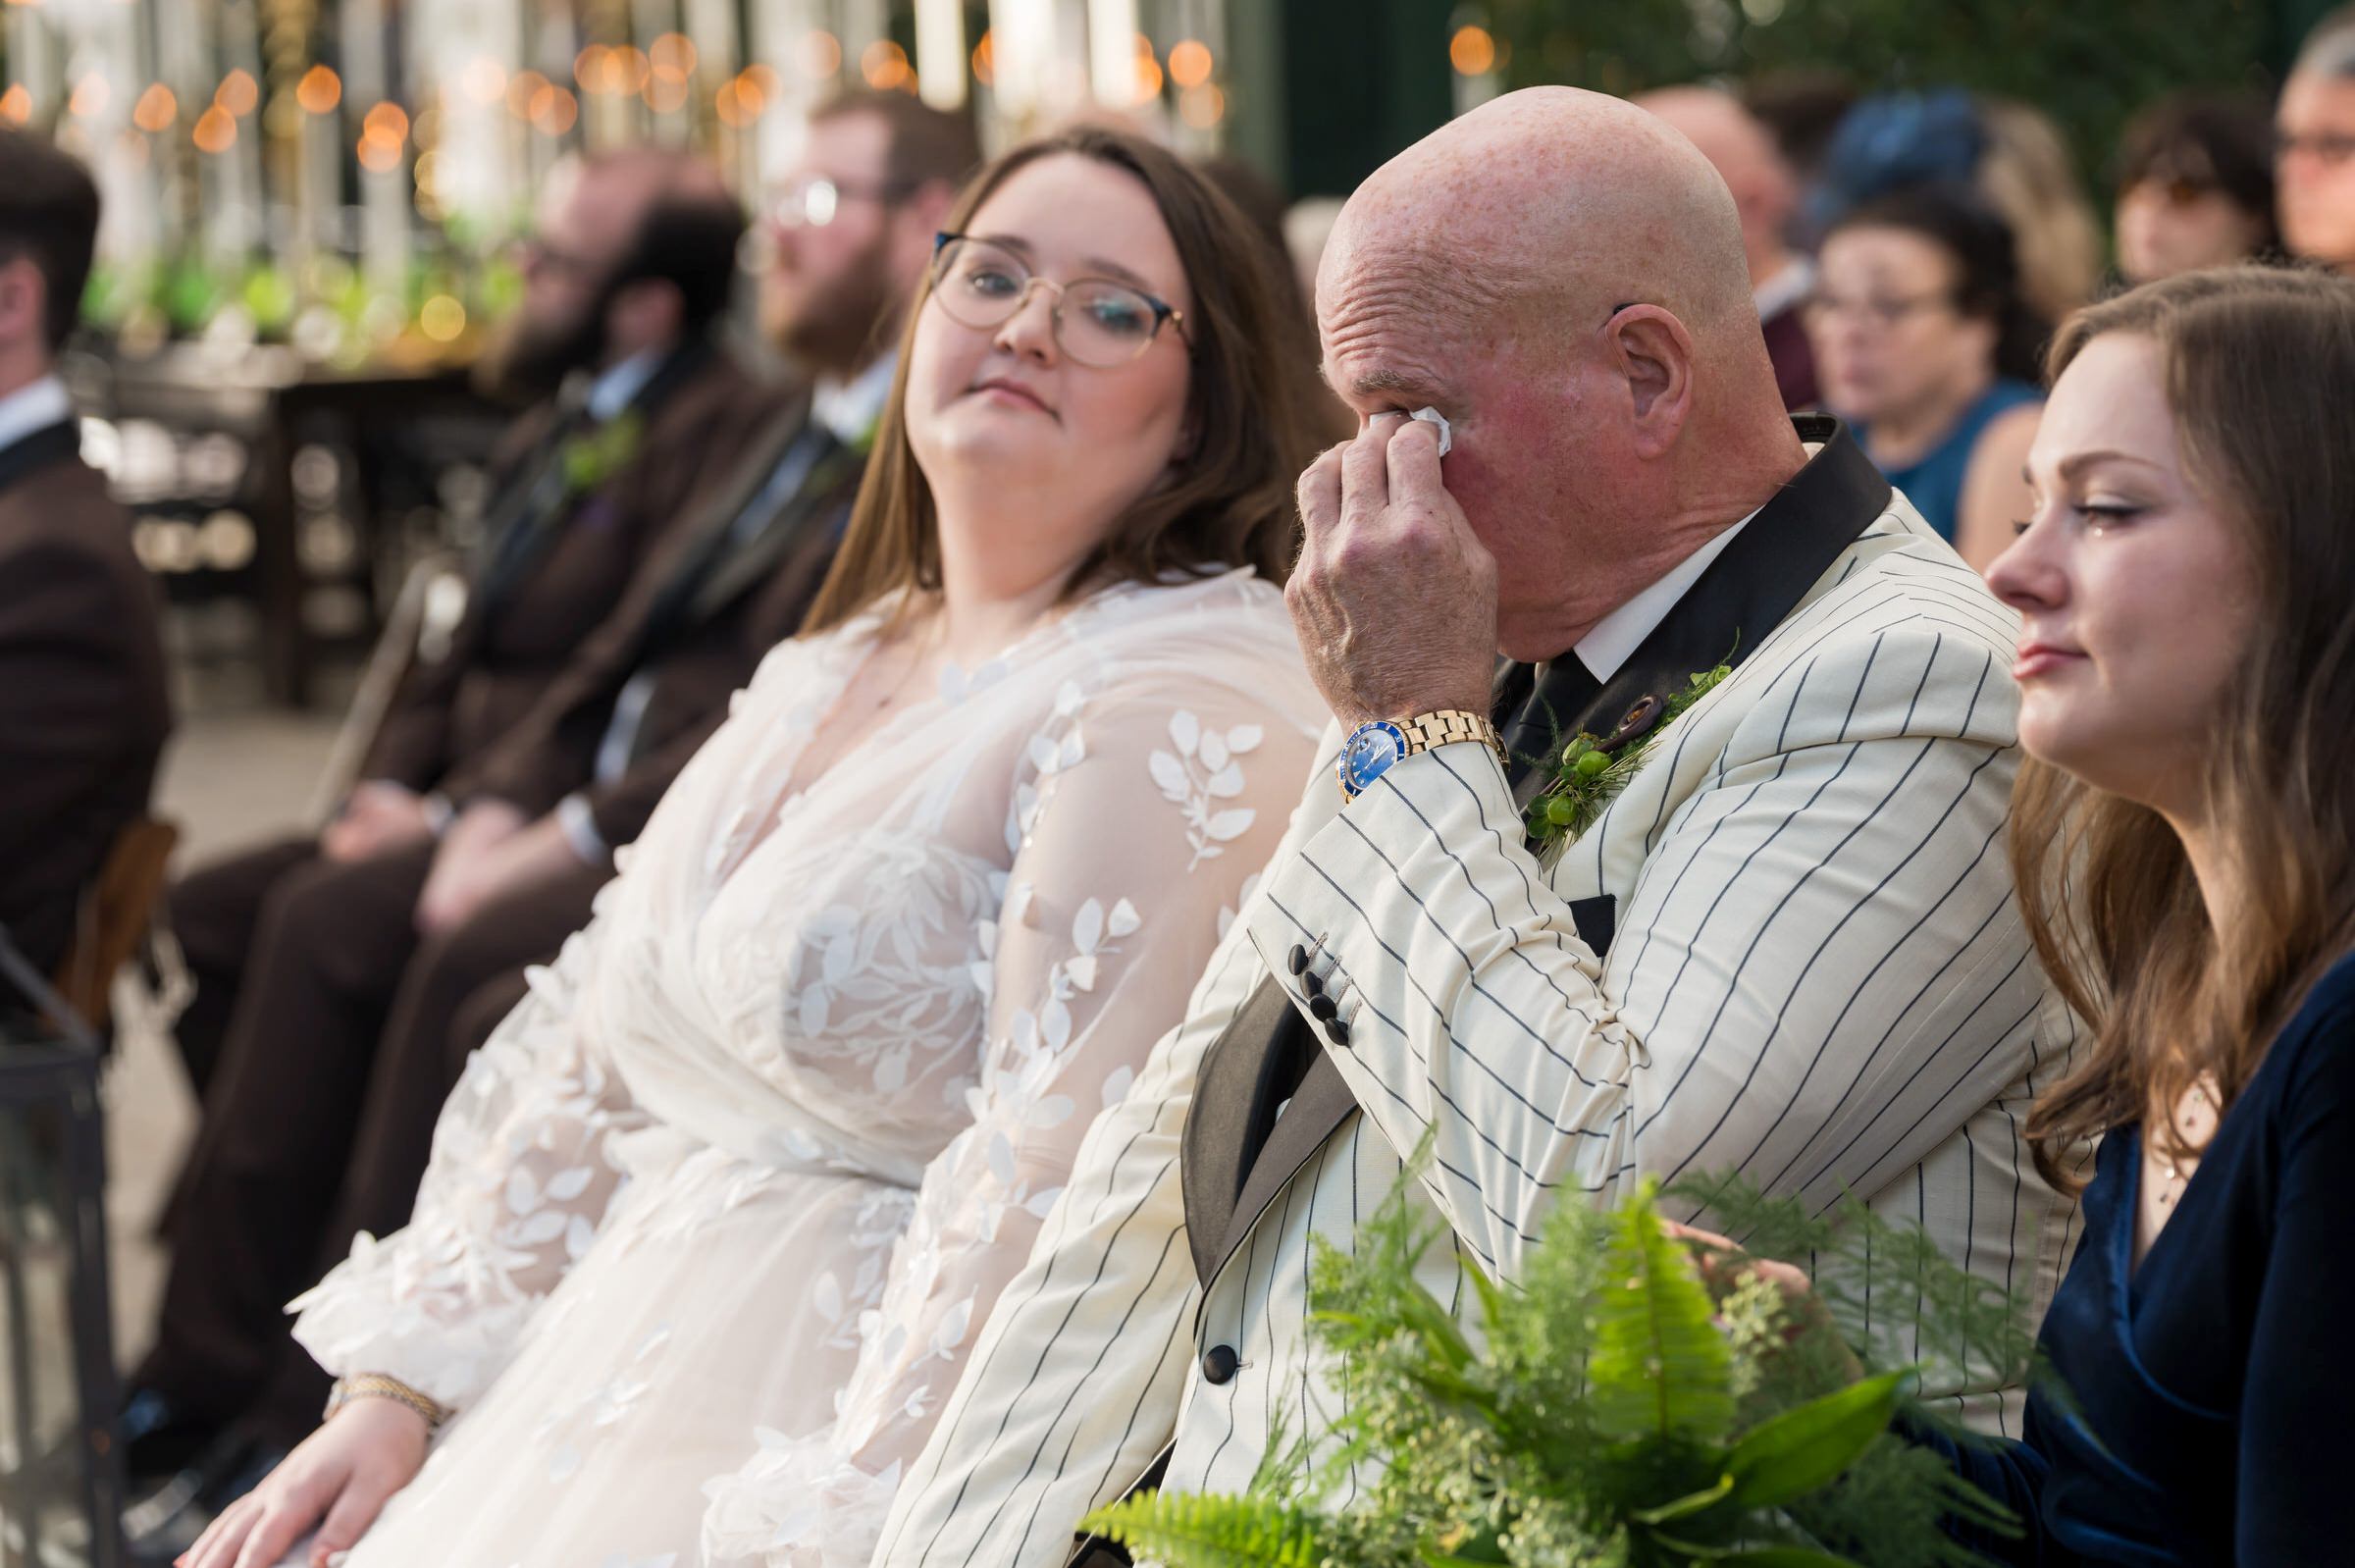 A dad wipes away tears during a Planterra wedding ceremony.  